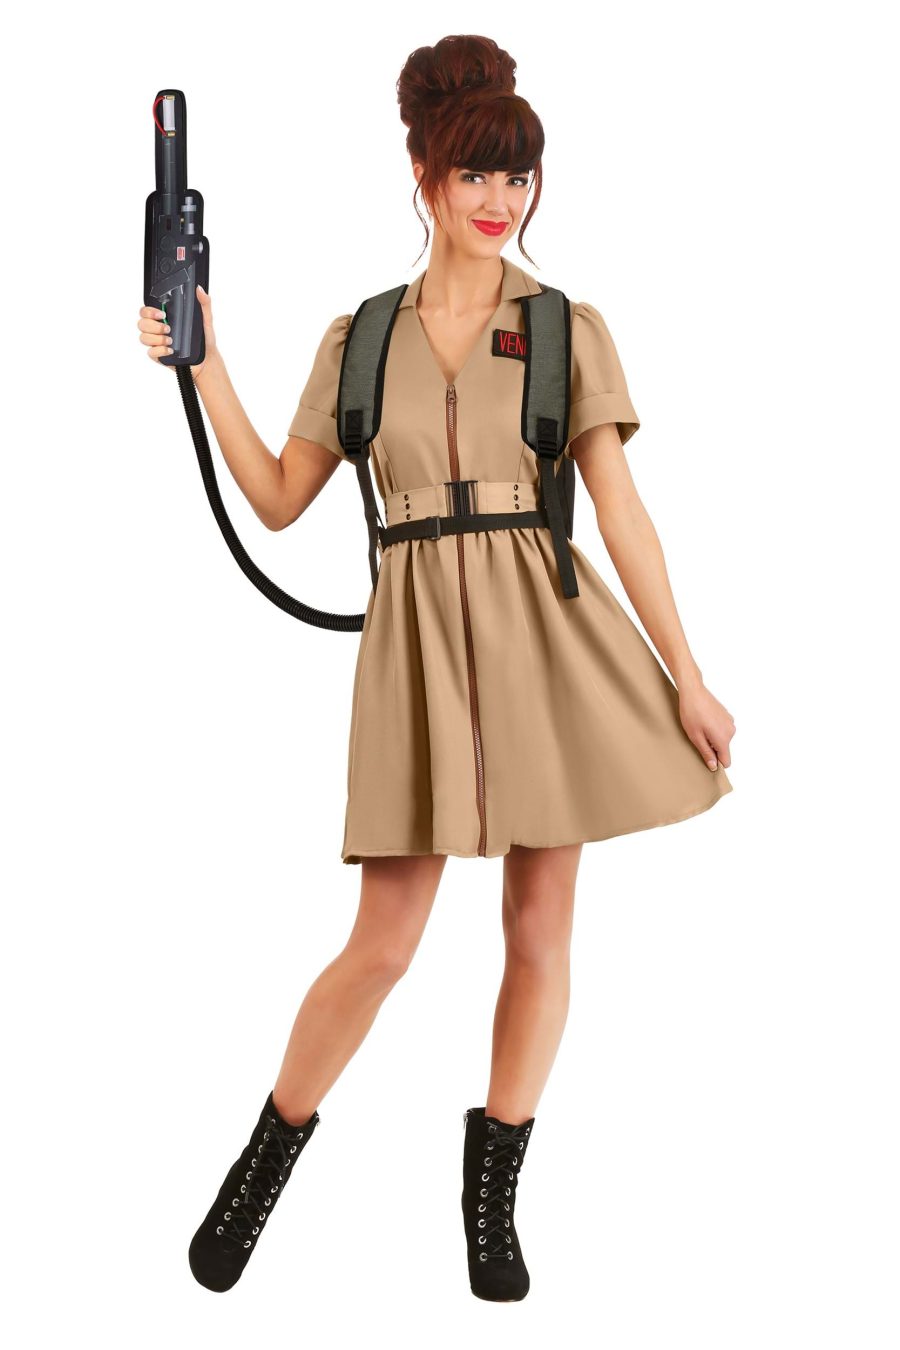 Ghostbusters Costume Dress for Women